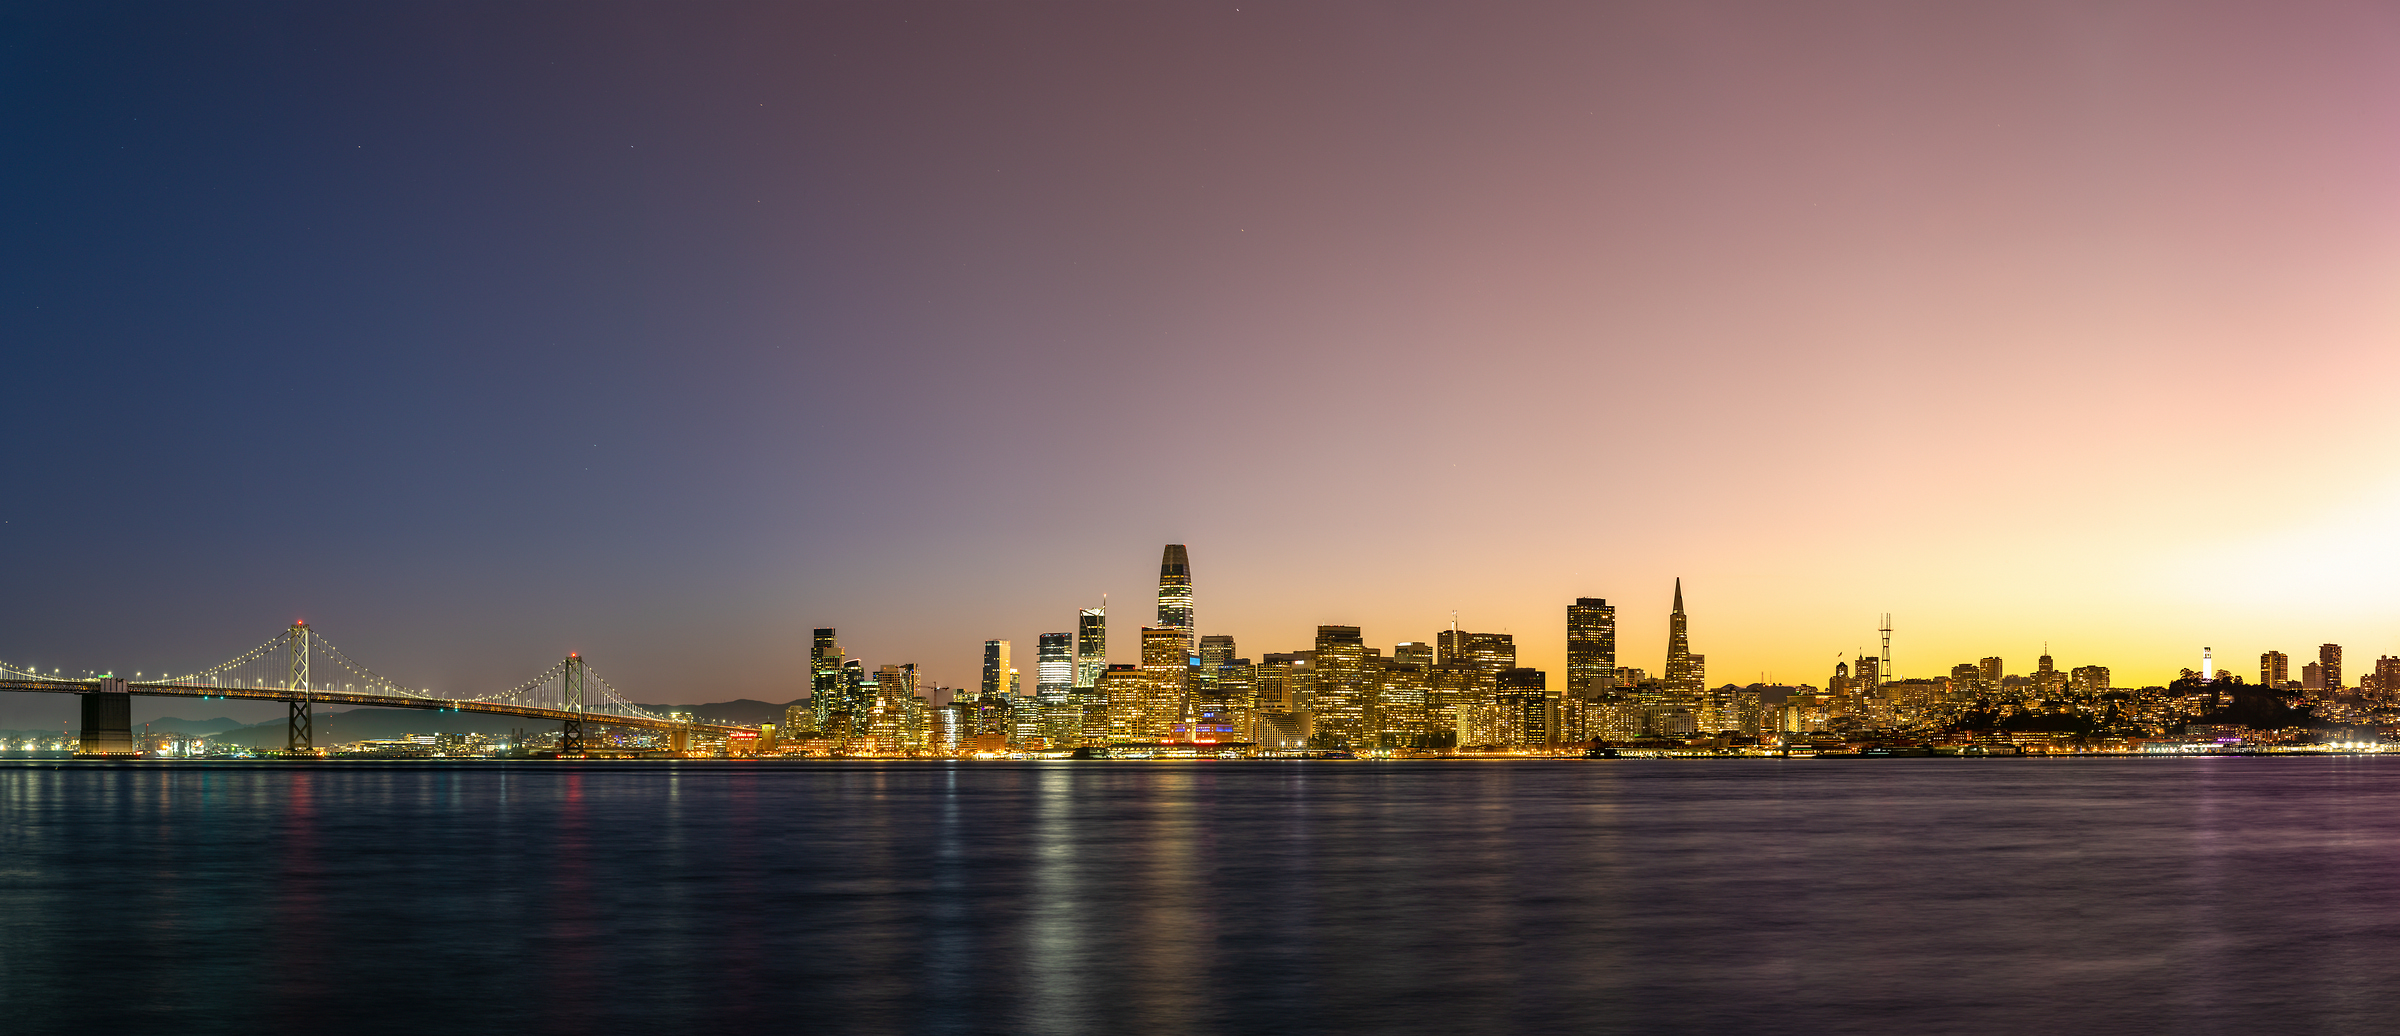 629 megapixels! A very high resolution, large-format VAST photo print of the San Francisco Skyline from Treasure Island at sunset; cityscape photograph created by Justin Katz in Treasure Island, San Francisco, California.